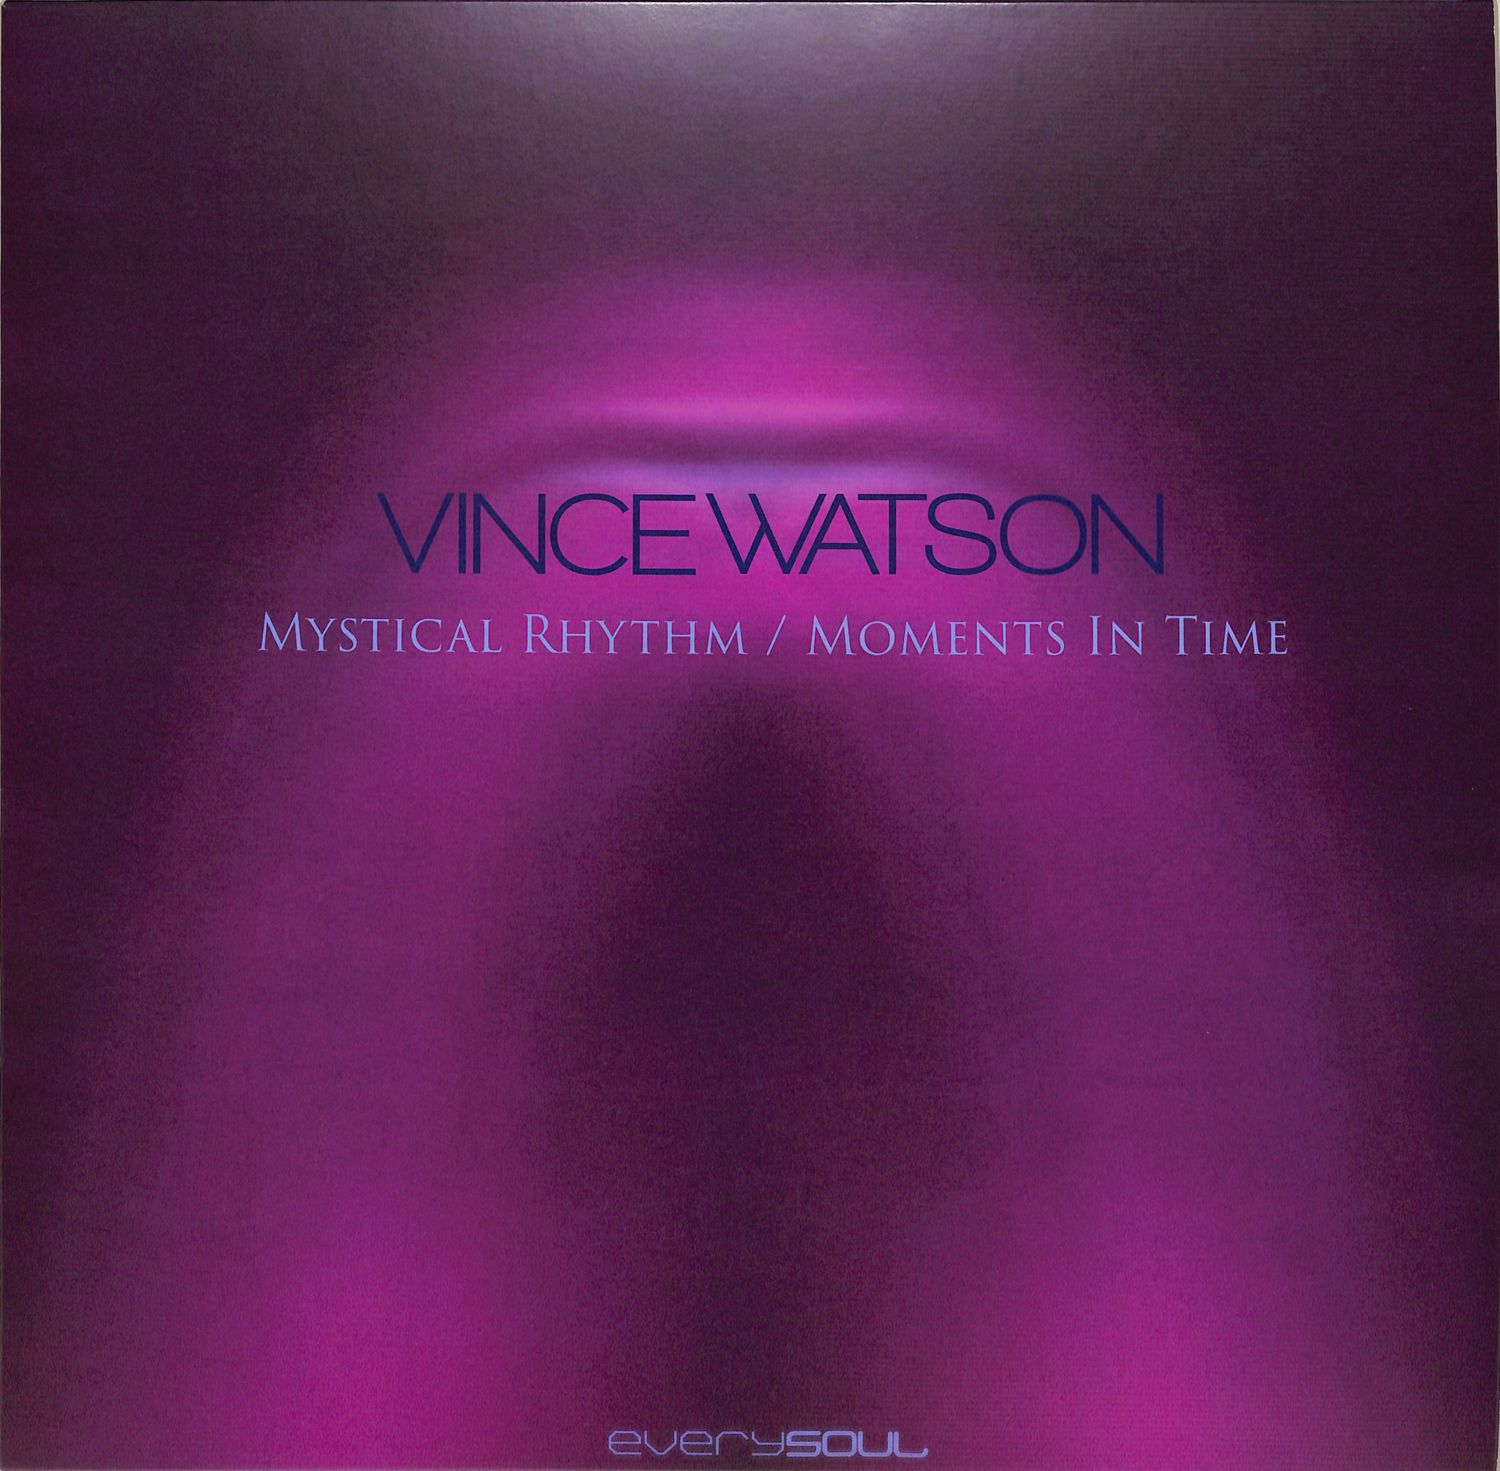 Vince Watson - MYSTICAL RHYTHM / MOMENTS IN TIME